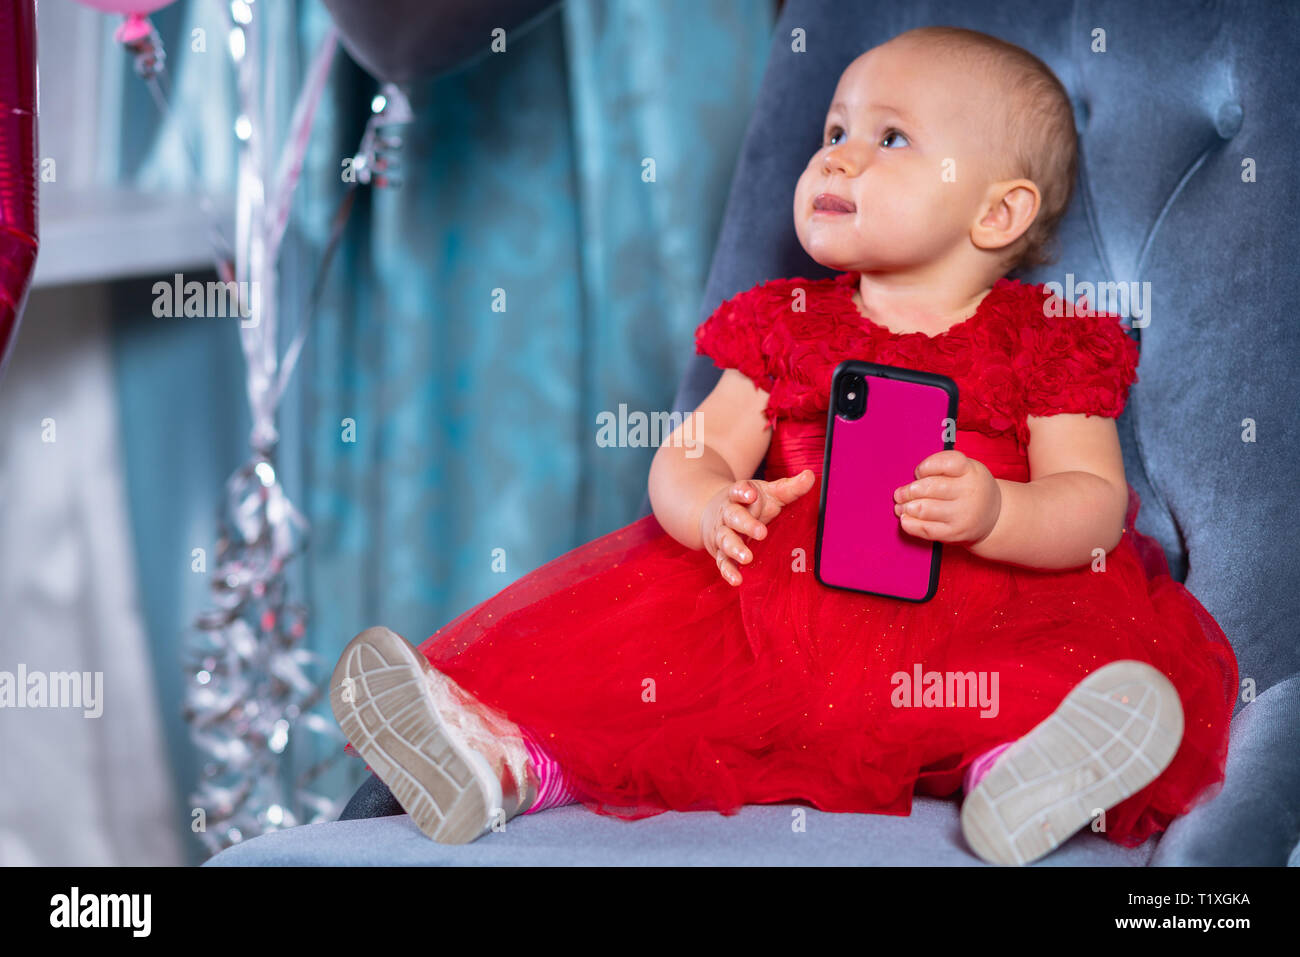 Cute little baby girl in festive holiday red dress, sitting on blue velvet chair and playing with smartphone in her hands Stock Photo